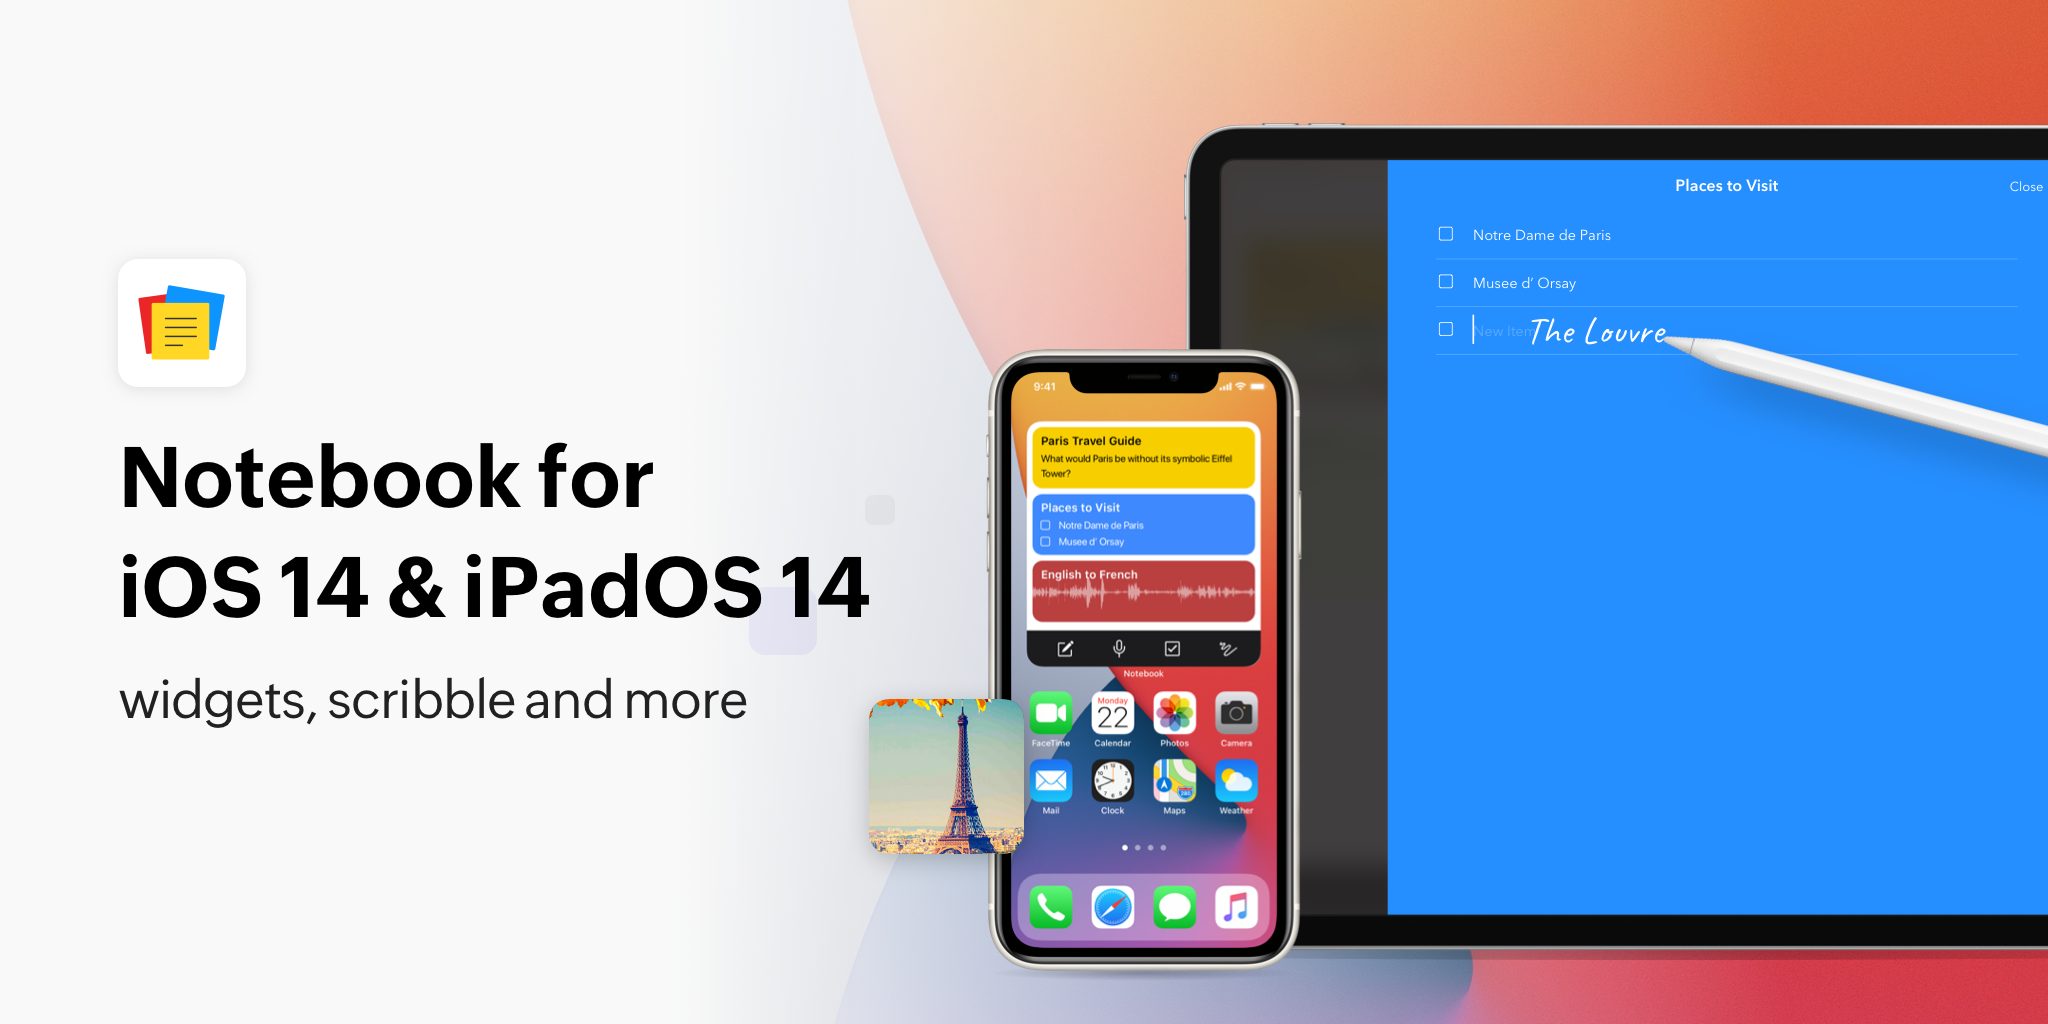 Notebook for iOS 14 and iPadOS 14: Widgets, Scribble, and more